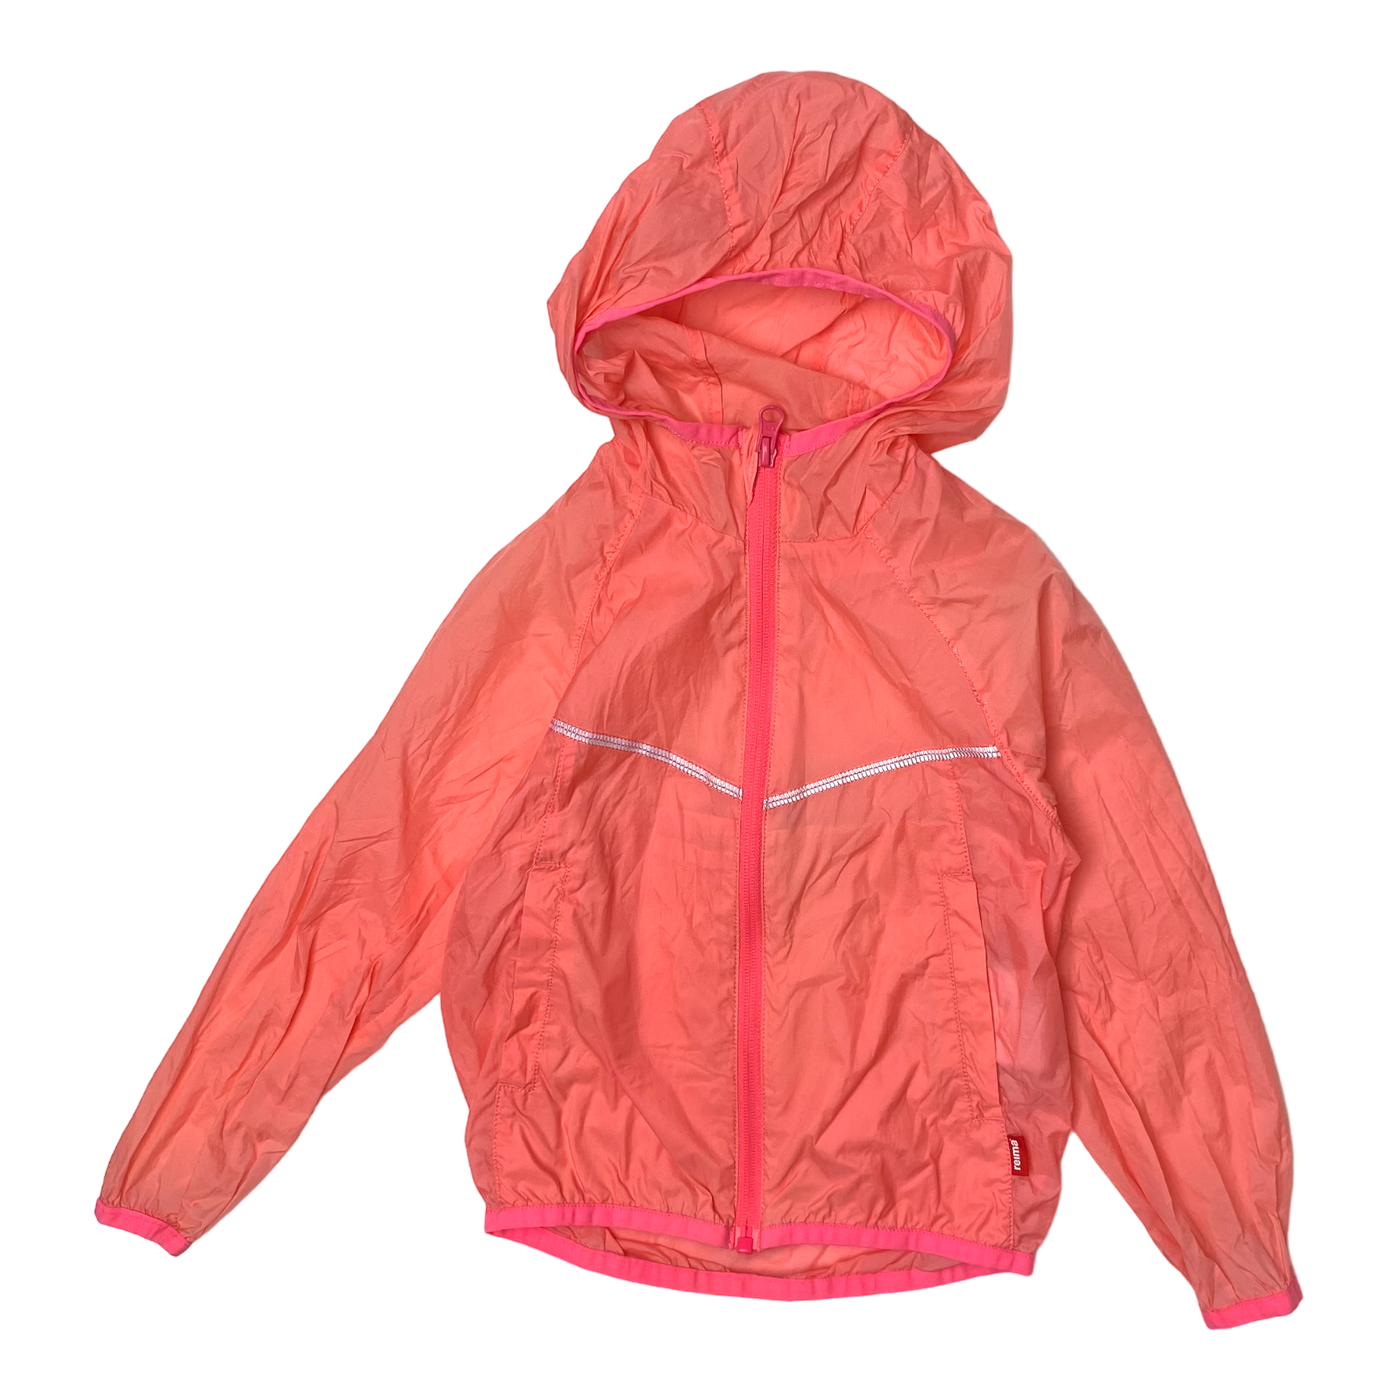 Reima light weight shell jacket, coral pink | 104cm